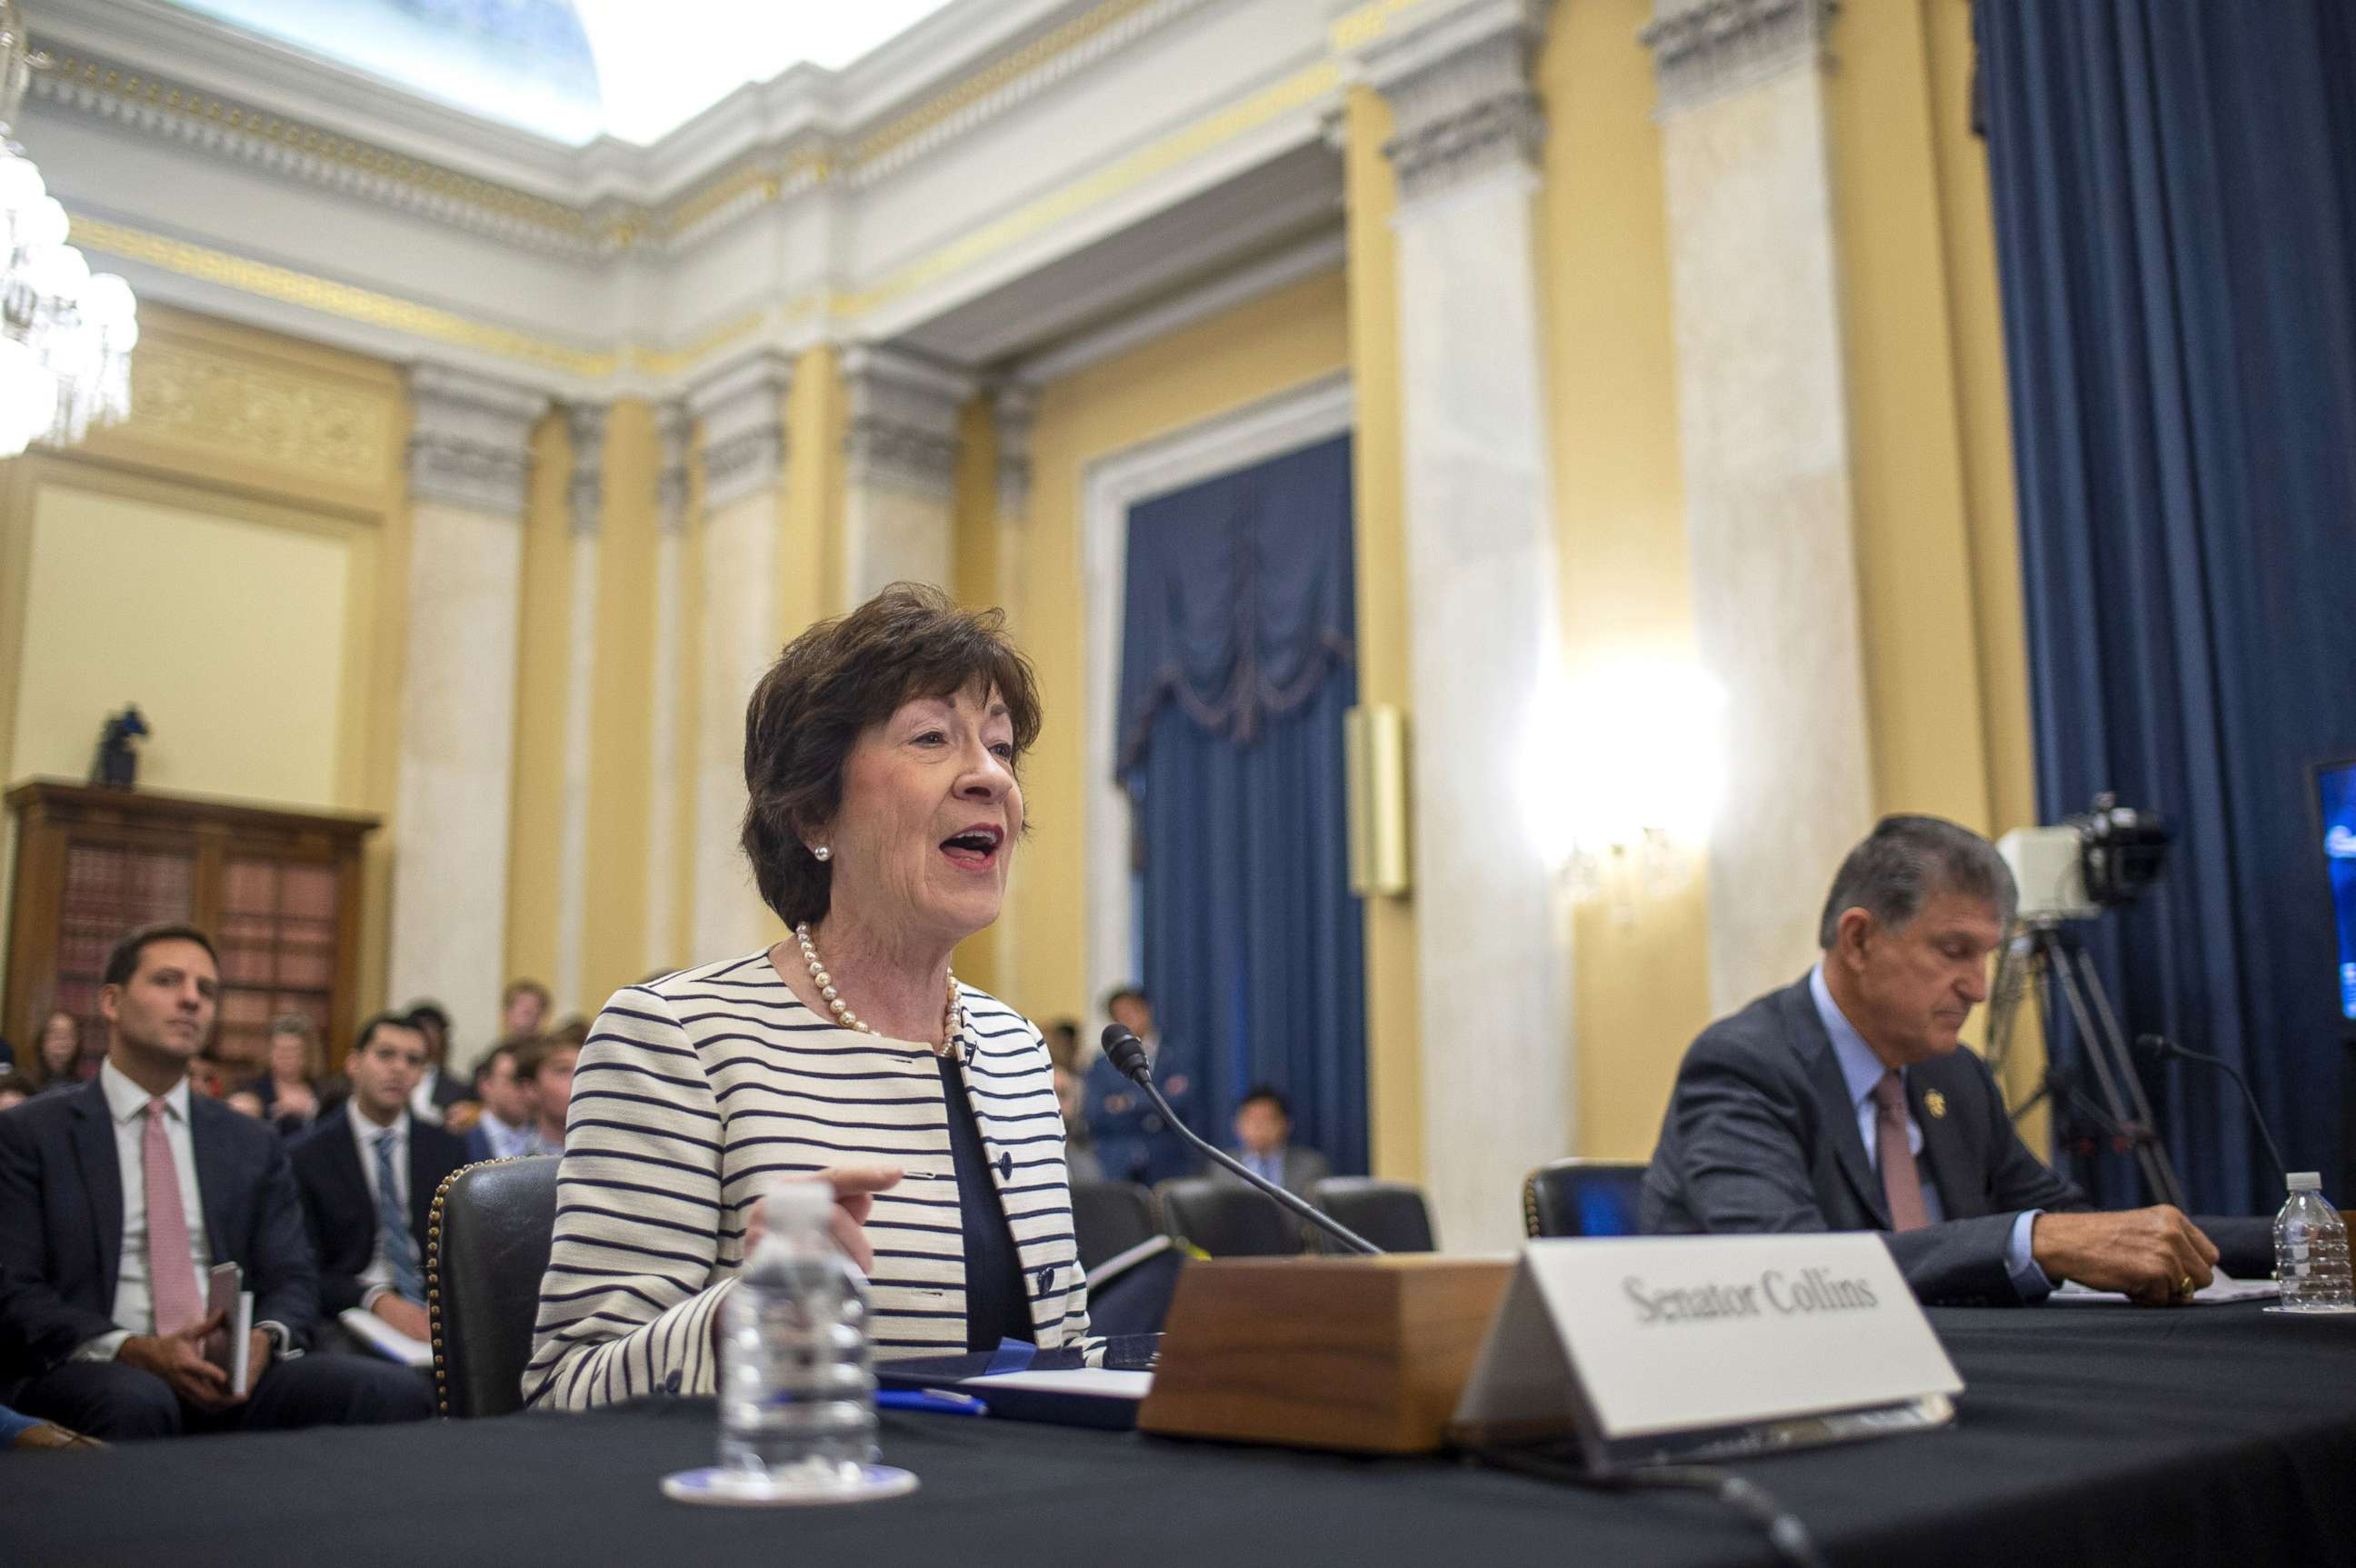 PHOTO: Sen. Susan Collins speaks as Sen. Joe Manchin looks on during a Senate Rules and Administration hearing examining on reforming the Electoral Count Act at the U.S. Capitol in Washington, D.C., Aug. 3, 2022.